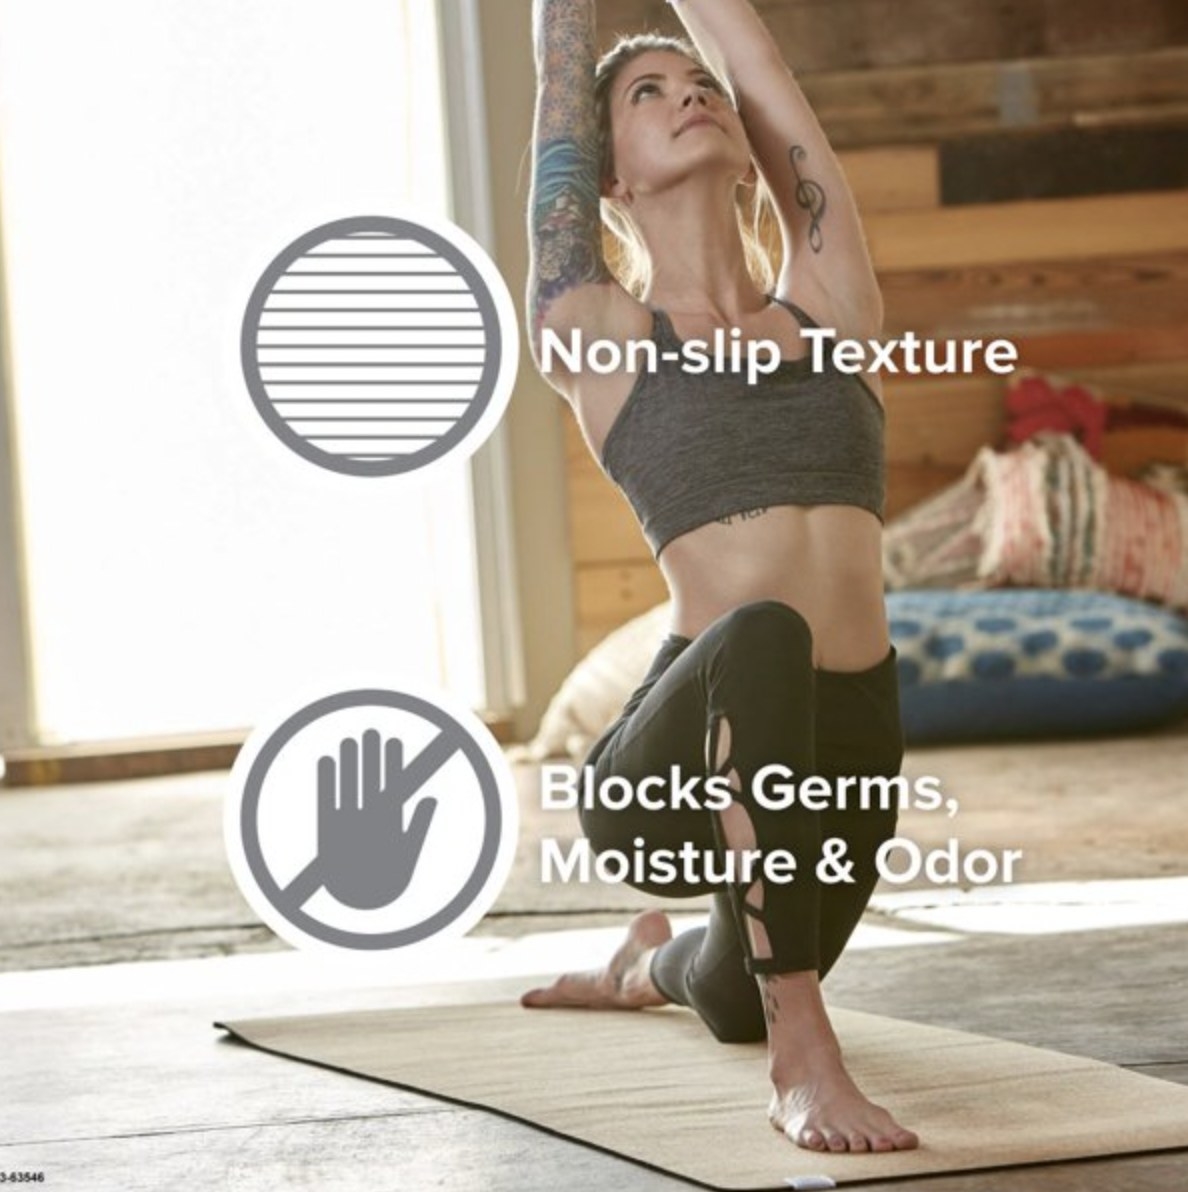 Model stretching in low lunge on cork mat with text detailing its non-slip texture and ability to block germs, moisture &amp;amp; odor